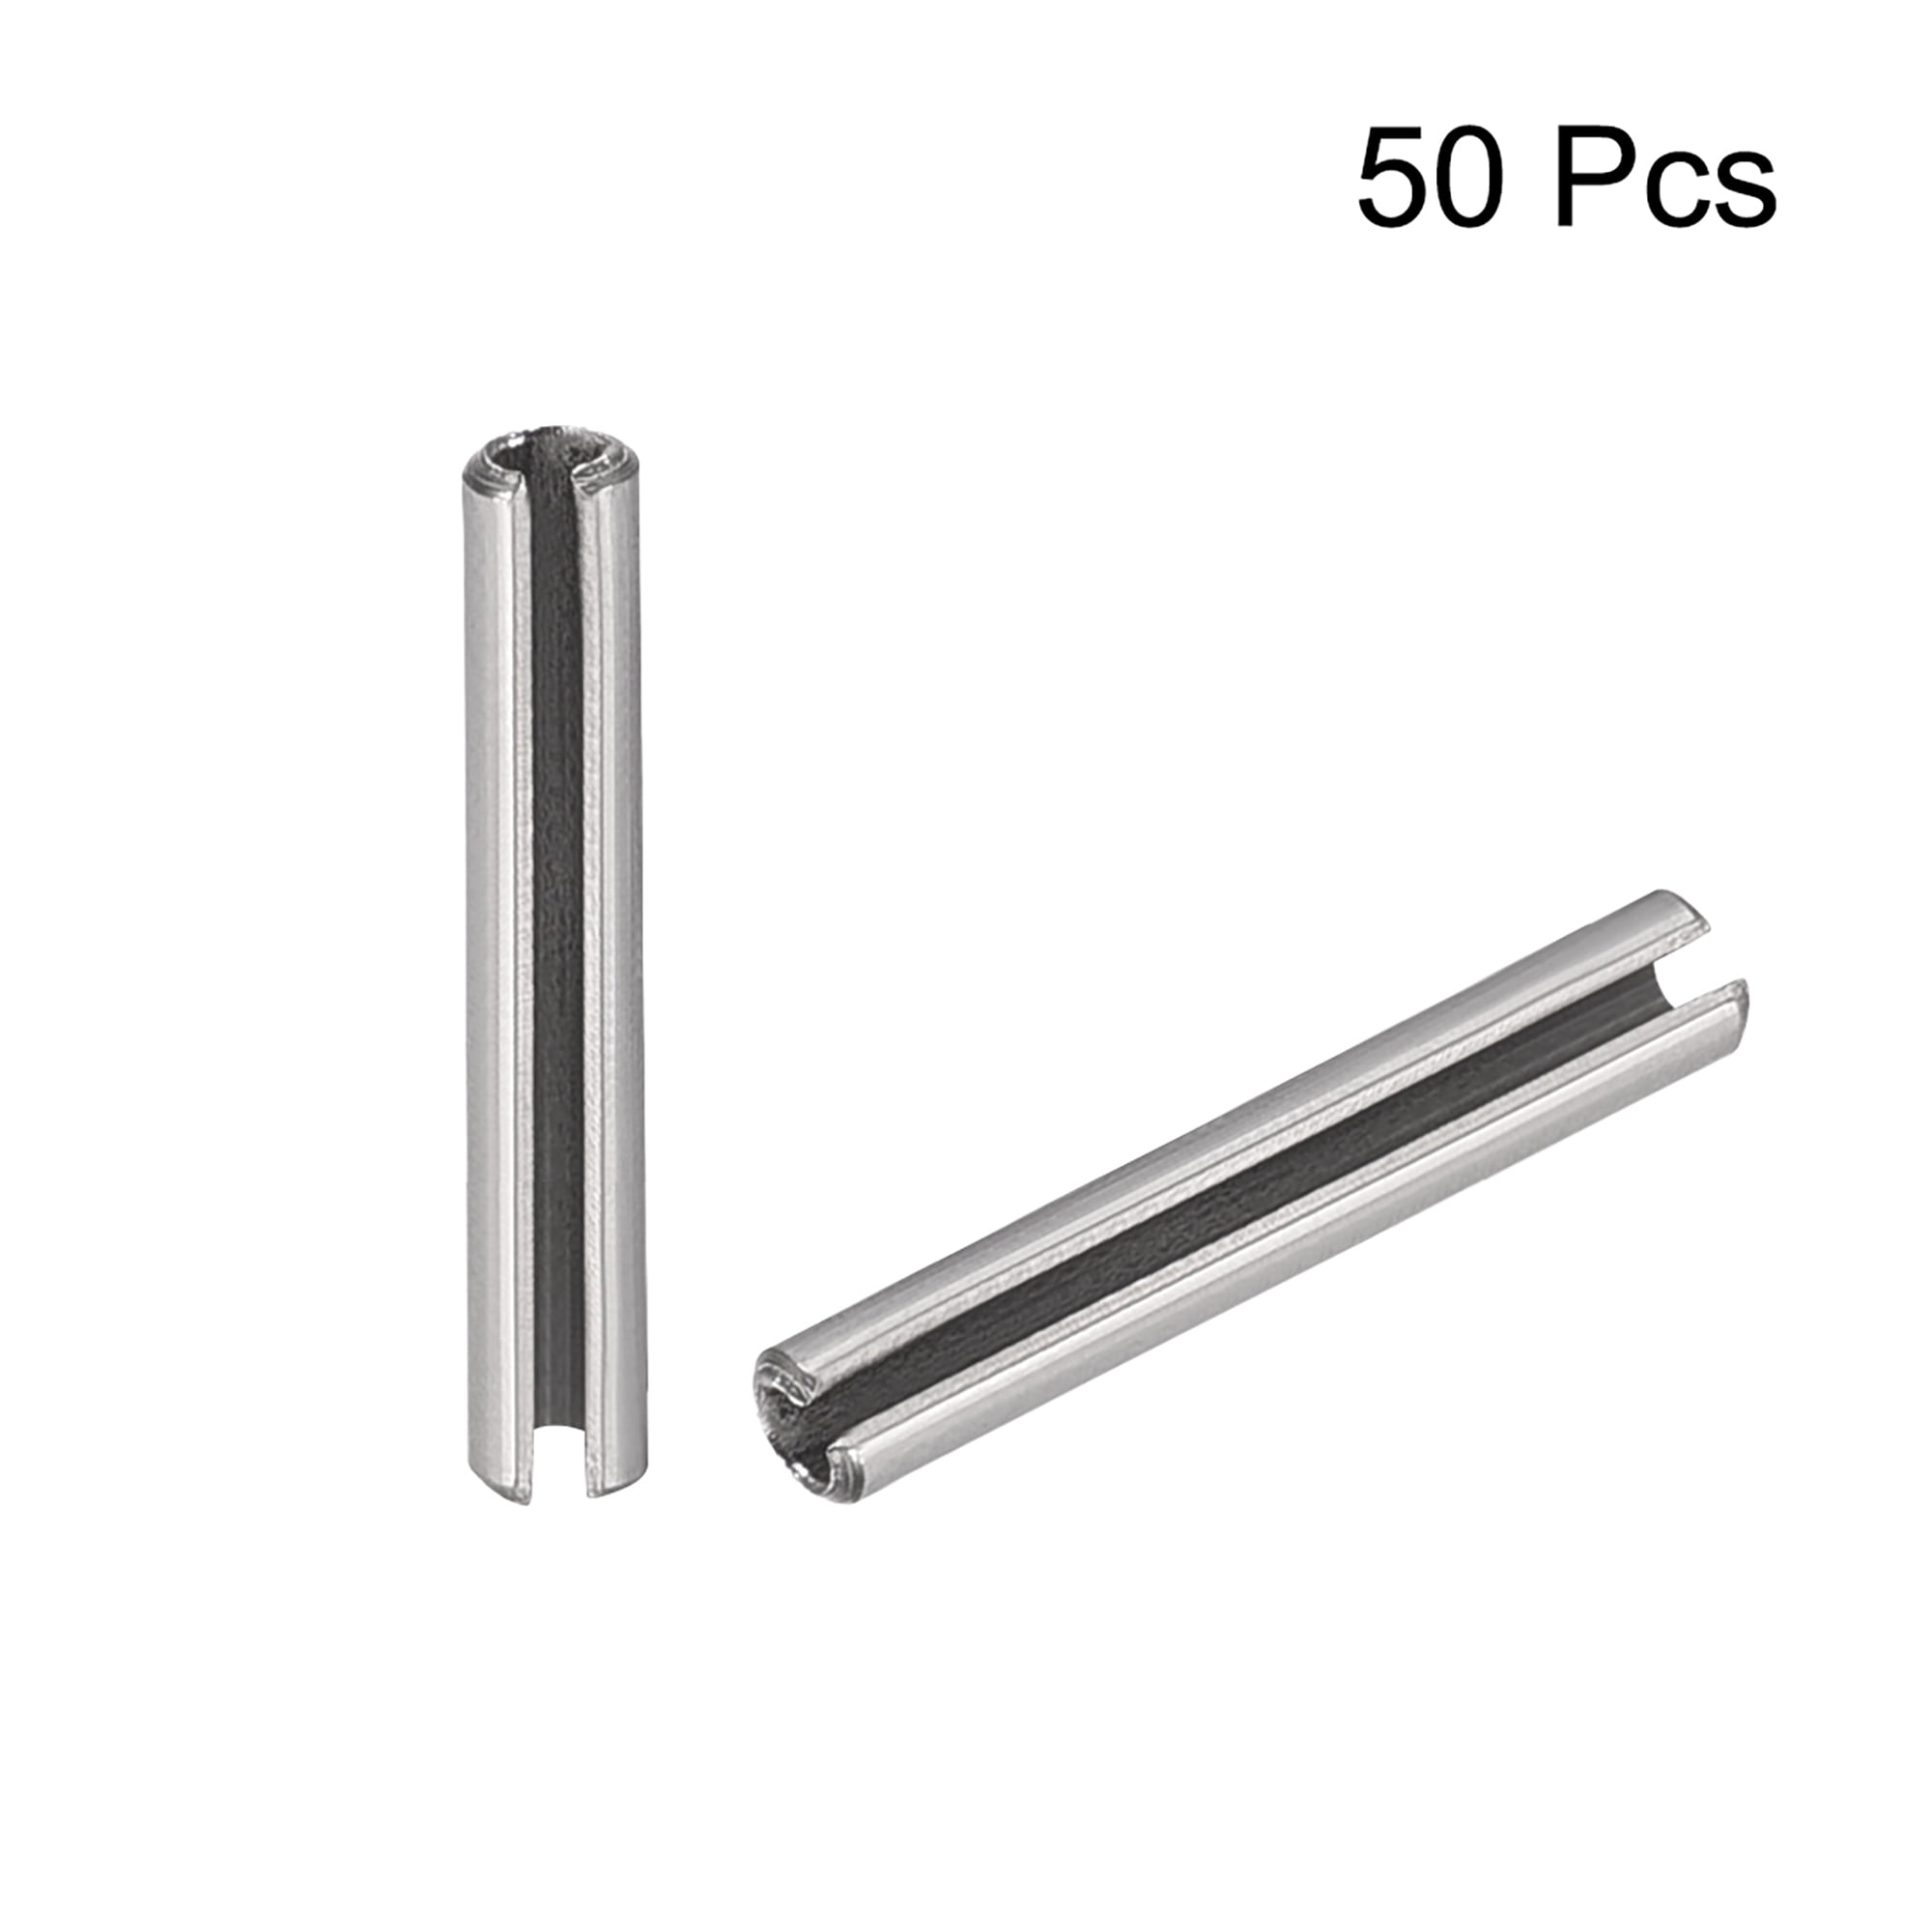 Details about   M1.5 x 16mm 304 Stainless Steel Split Spring Roll Dowel Pins Plain Finish 50Pcs 